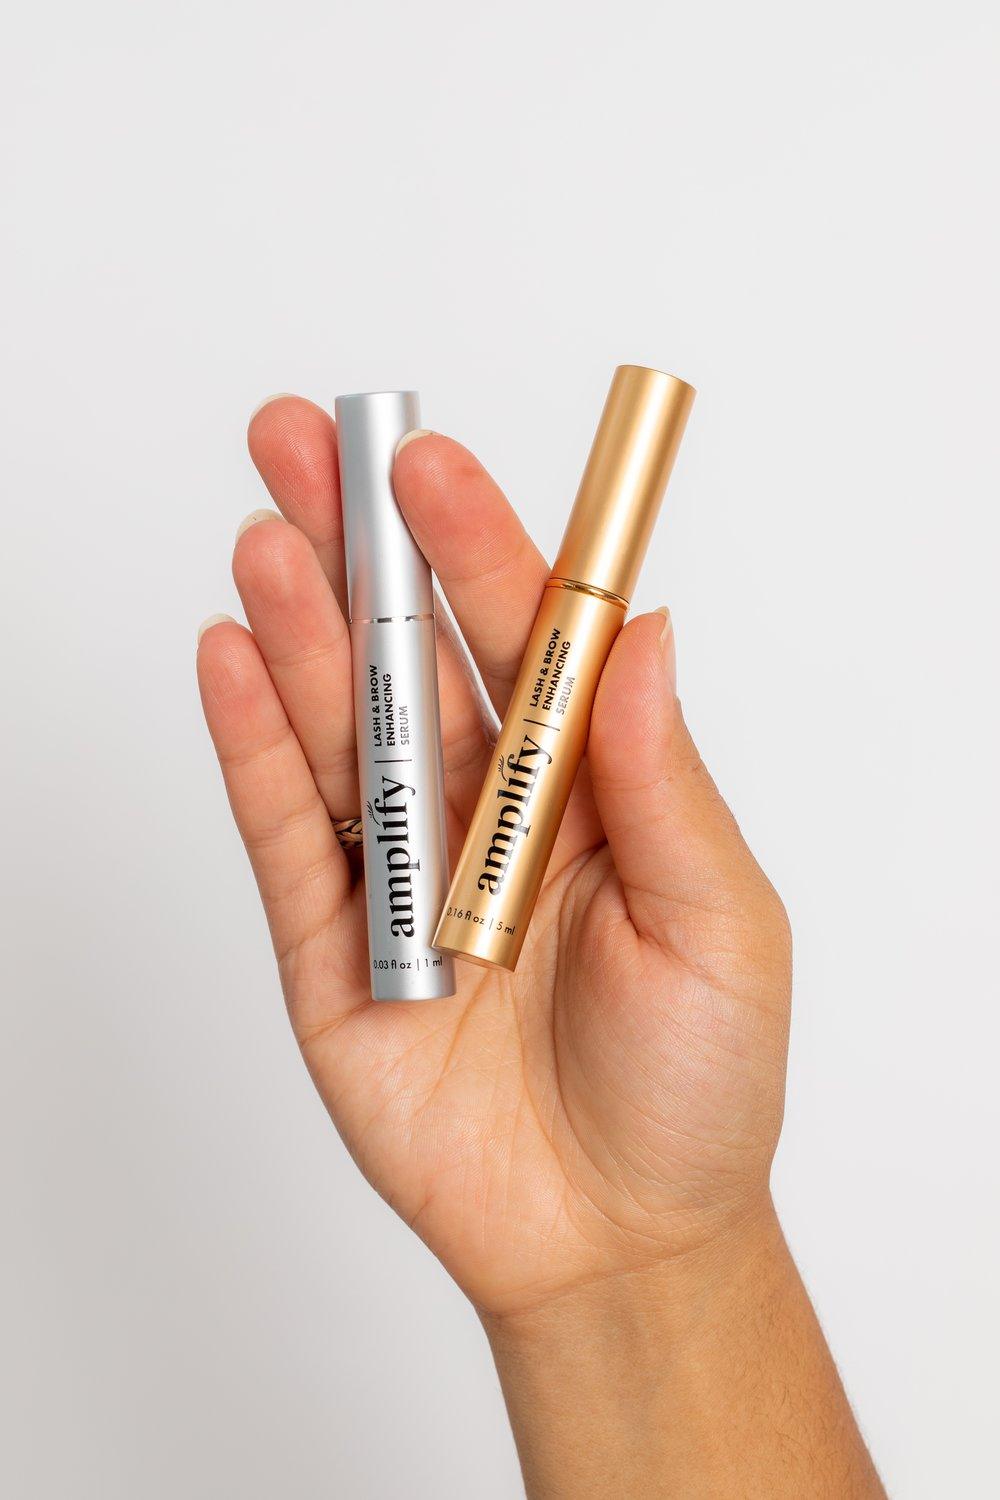 Amplify: A Lash Serum That Works! - Actiiv Hair Science